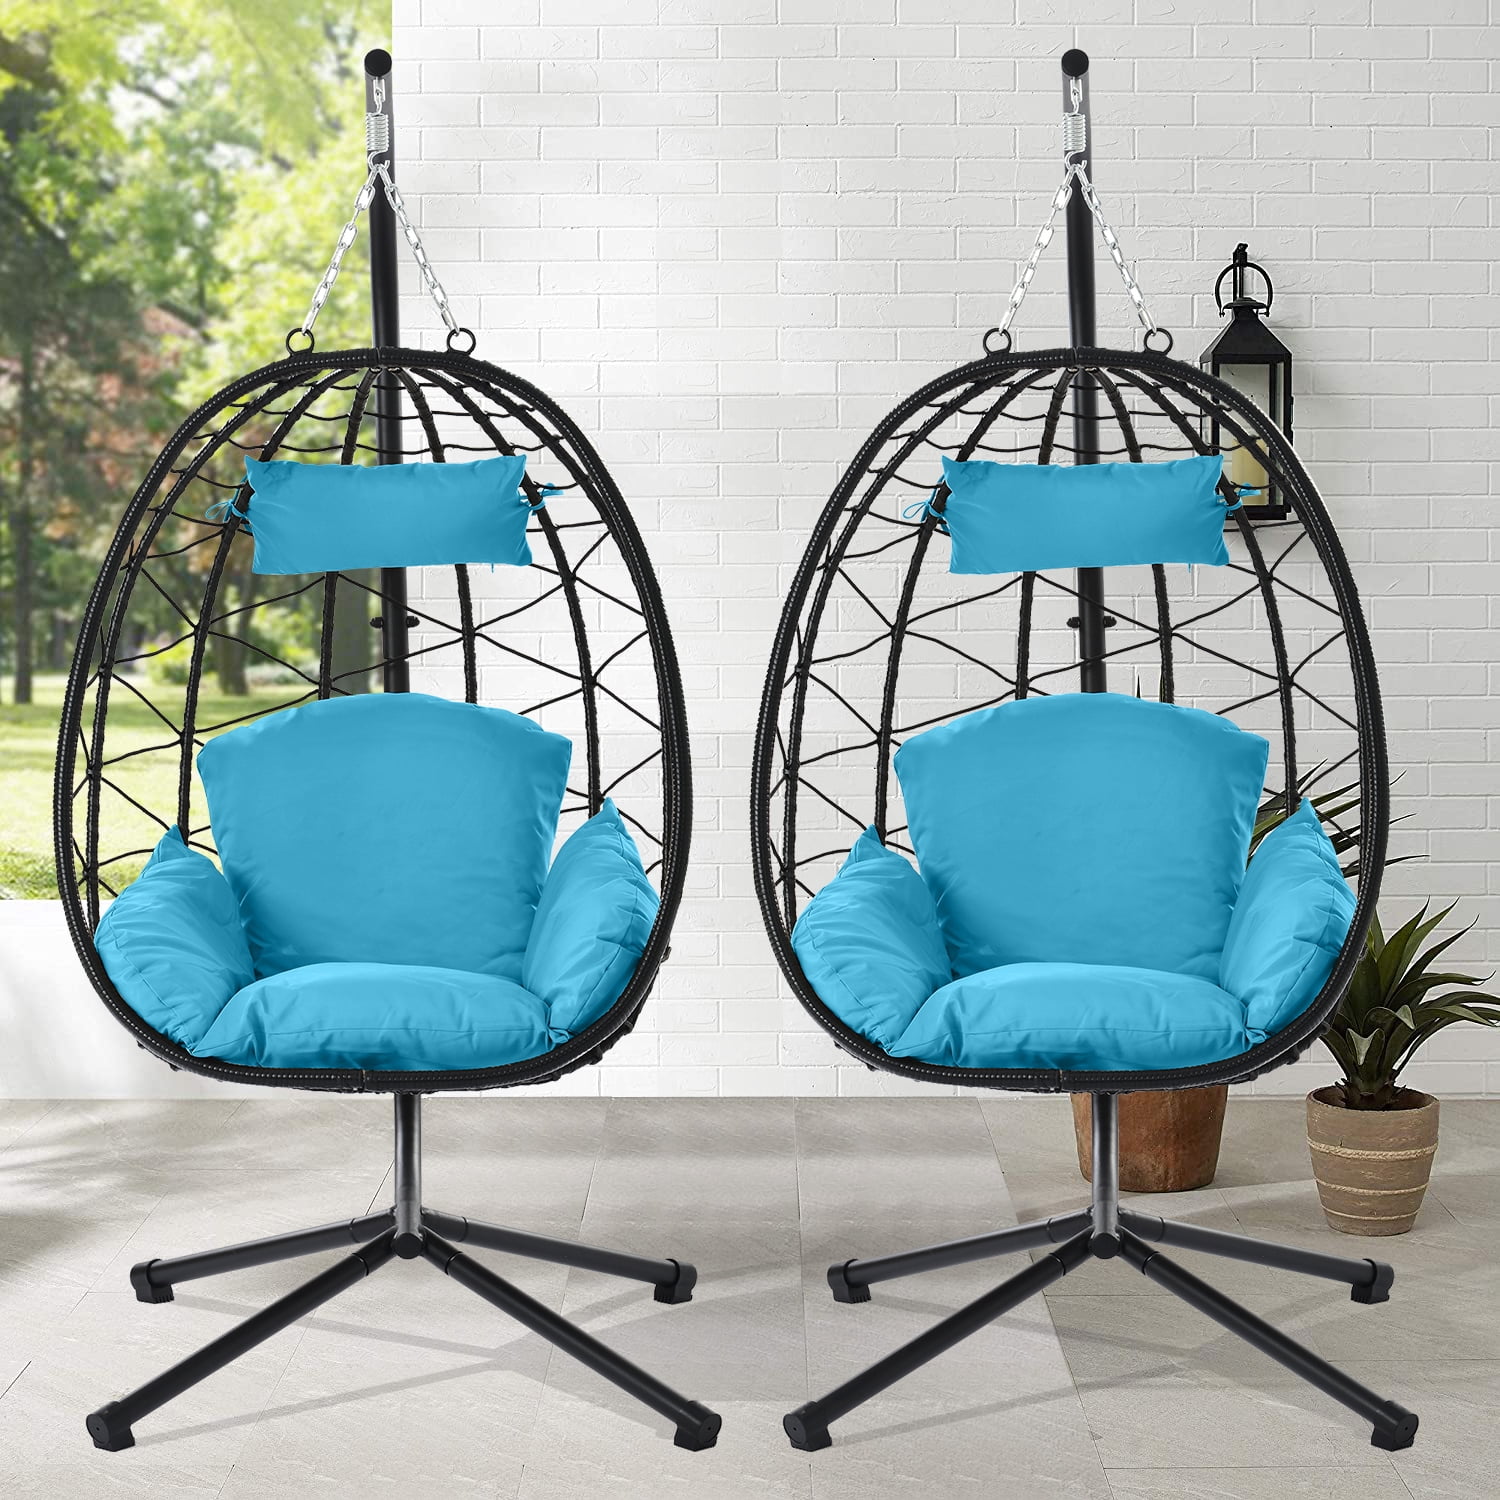 Egg Chair Outdoor Basket Chairs - 2 PC Wicker Patio Egg Chairs Set with 1  Chair and 1 Ottoman Rattan Teardrop Cuddle Cocoon Chair for Indoor Bedroom